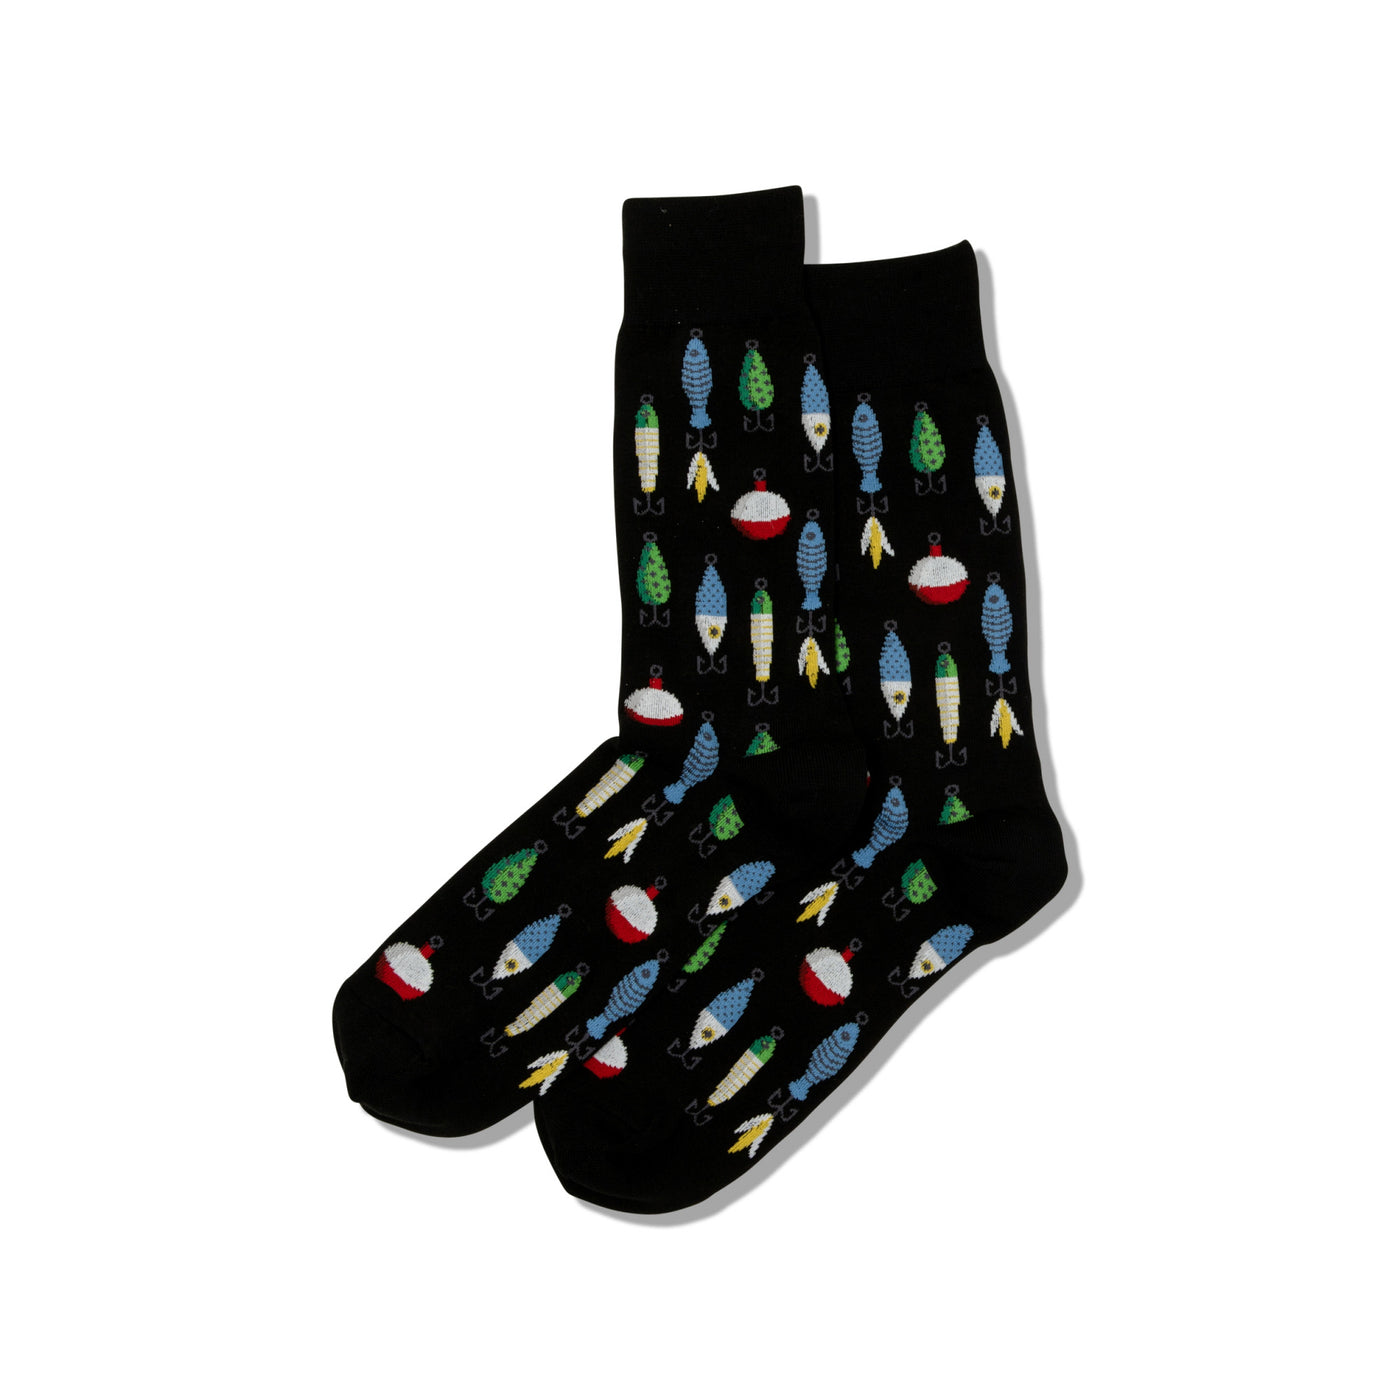 "Fishing Lures" Cotton Crew Socks by Hot Sox - Large